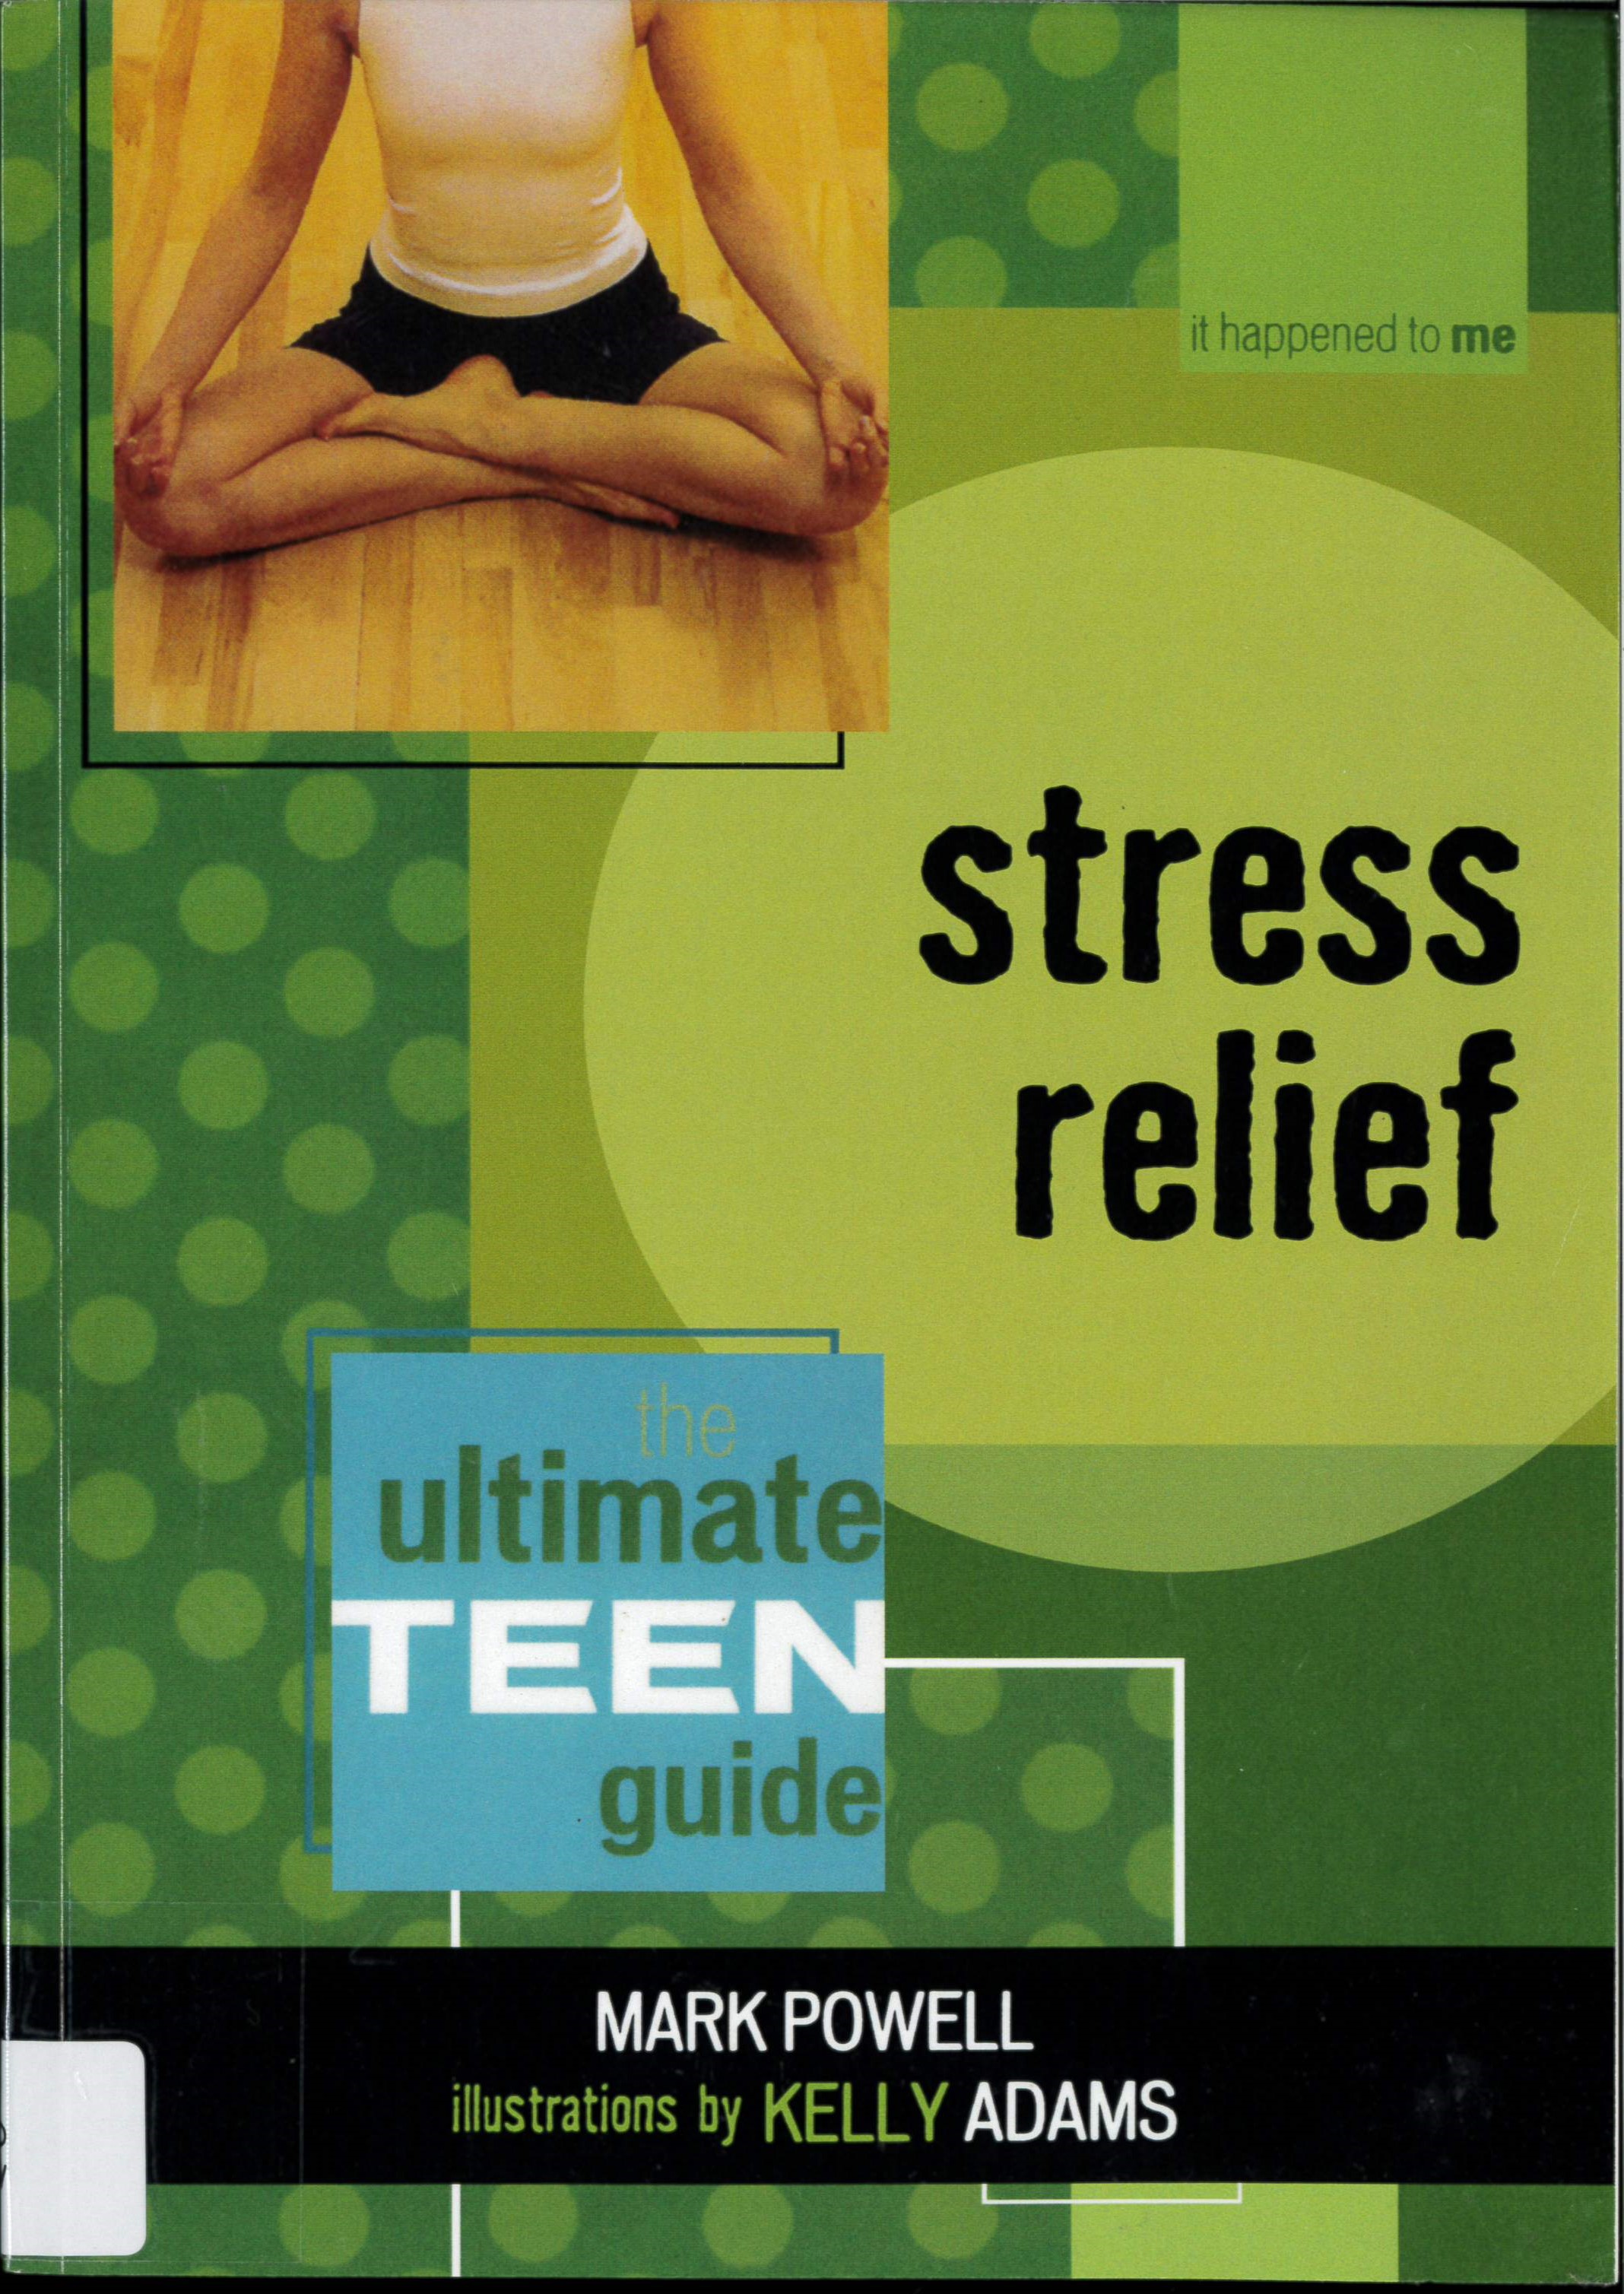 Stress relief : the ultimate teen guide /